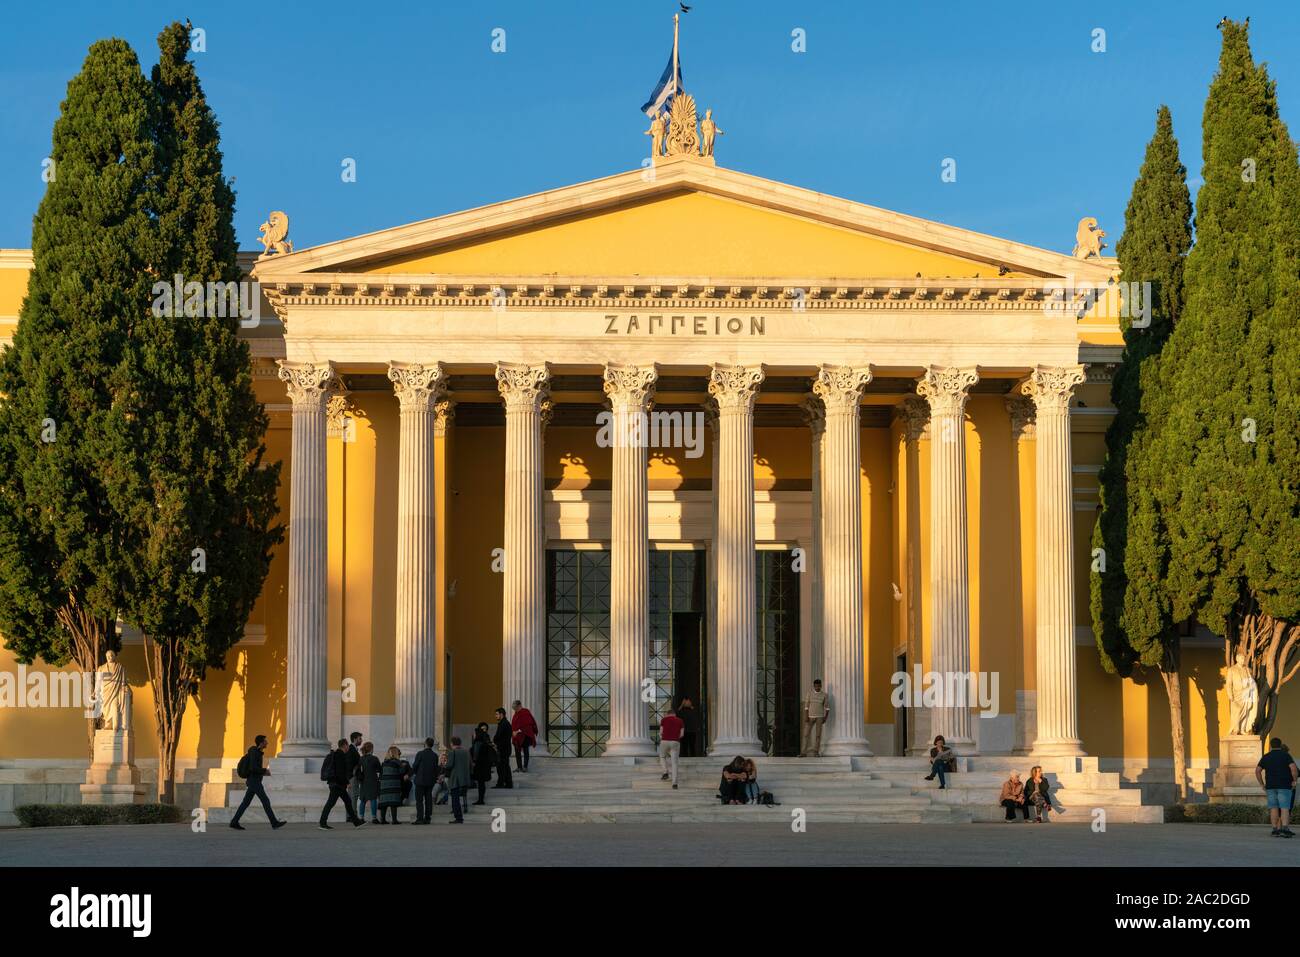 3rd Nov 2019 - Athens, Greece. The Zappeion is a building in the National Gardens of Athens. Stock Photo